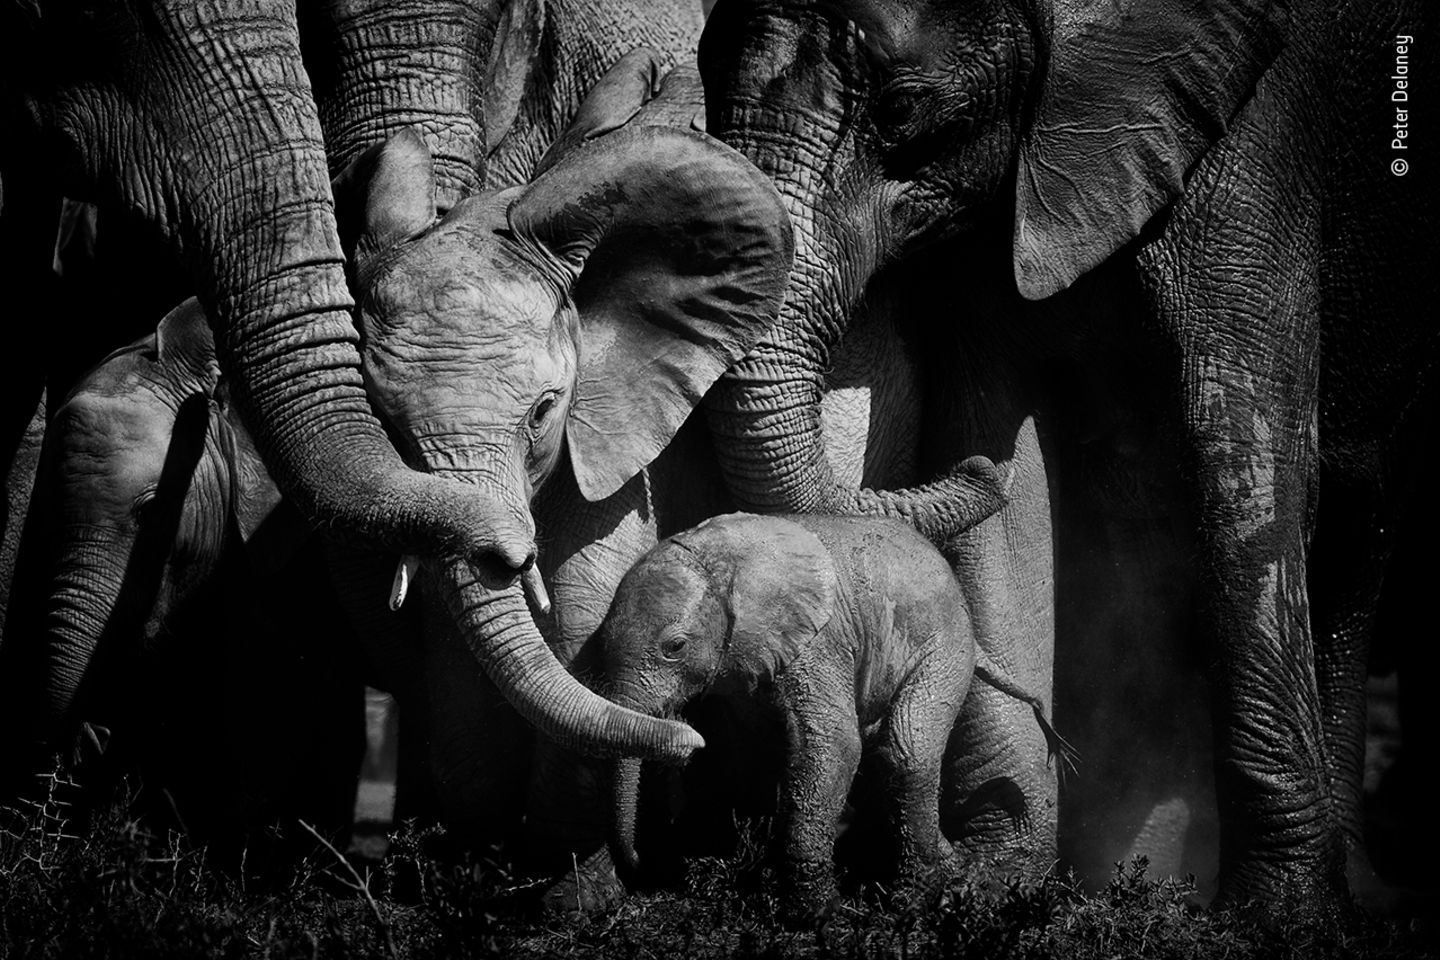 Bonds of love by Peter Delaney, Ireland / South Africa      Peter looked on as a herd of elephants closed ranks, pushing their young into the middle of the group for protection. A bull elephant had been trying to separate a newborn calf from its mother. Peter was photographing the herd in Addo Elephant Reserve, South Africa, when the newborn let out a shriek. The herd reacted instantly – blowing loud calls, flapping ears and then surrounding the young and reaching out their trunks for reassurance. Elephants create bonds that last a lifetime, and they can show emotions from love to anger. Peter feels ‘There is something magical and beautiful when you observe elephants – it touches your soul and pulls at your heartstrings.’      Fujifilm X-H1 + XF 200mm lens; 1/5000 sec at f2; ISO 200; handheld.